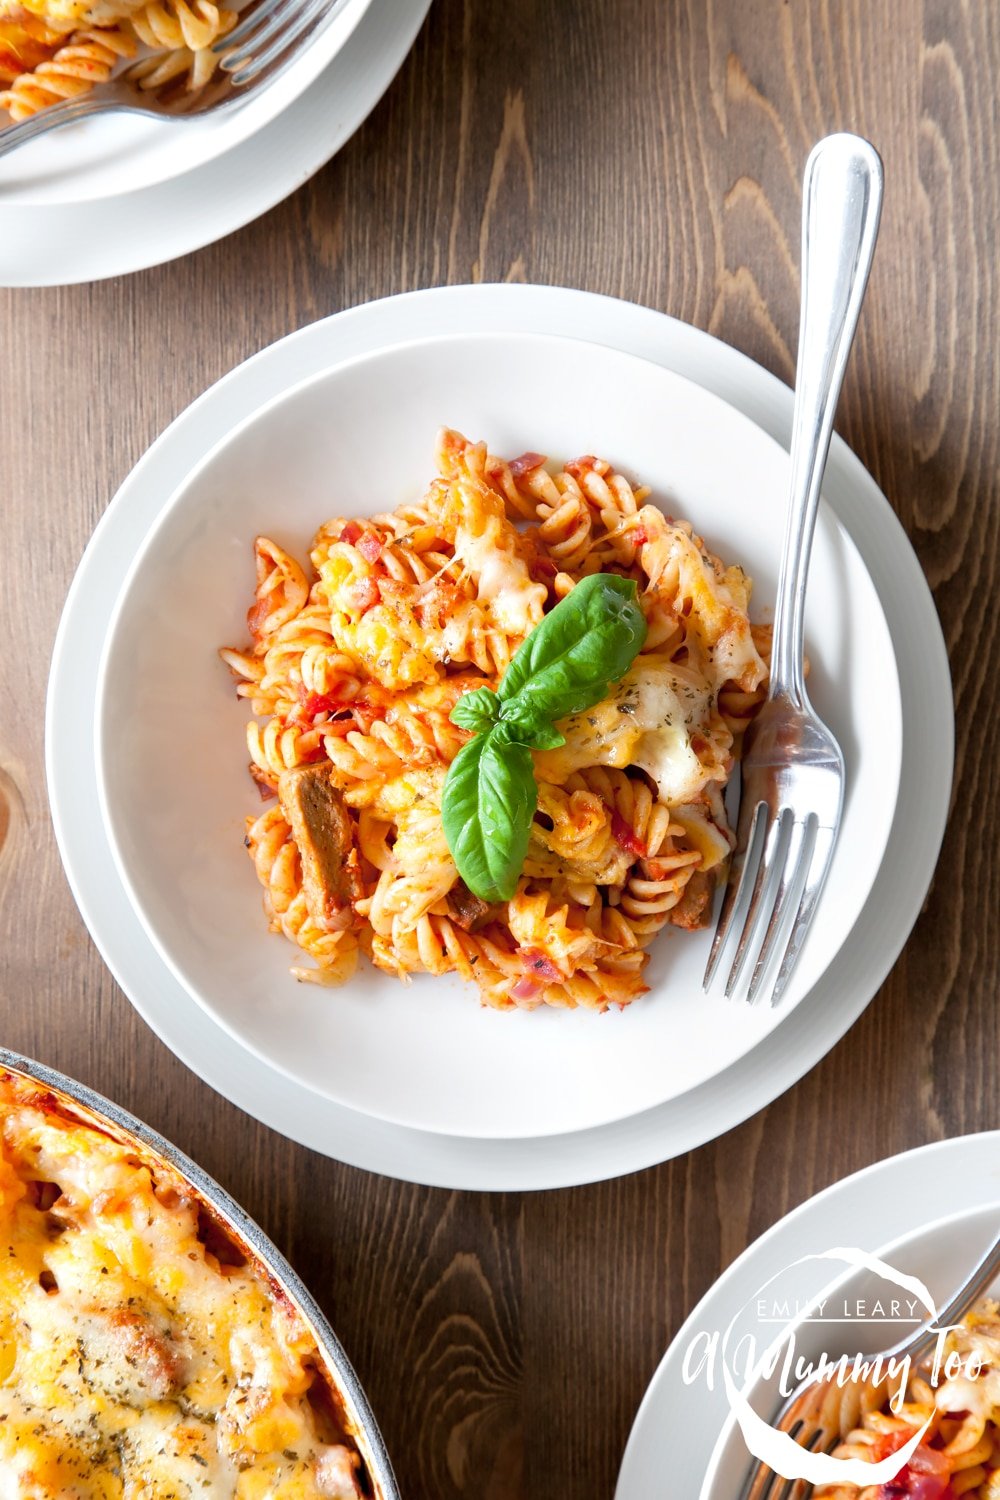 A delicious twist on the classic sausage pasta bake, this easy to make dish packs a flavourful punch with garlic, herbs and moreish Meat Free Steak Strips.